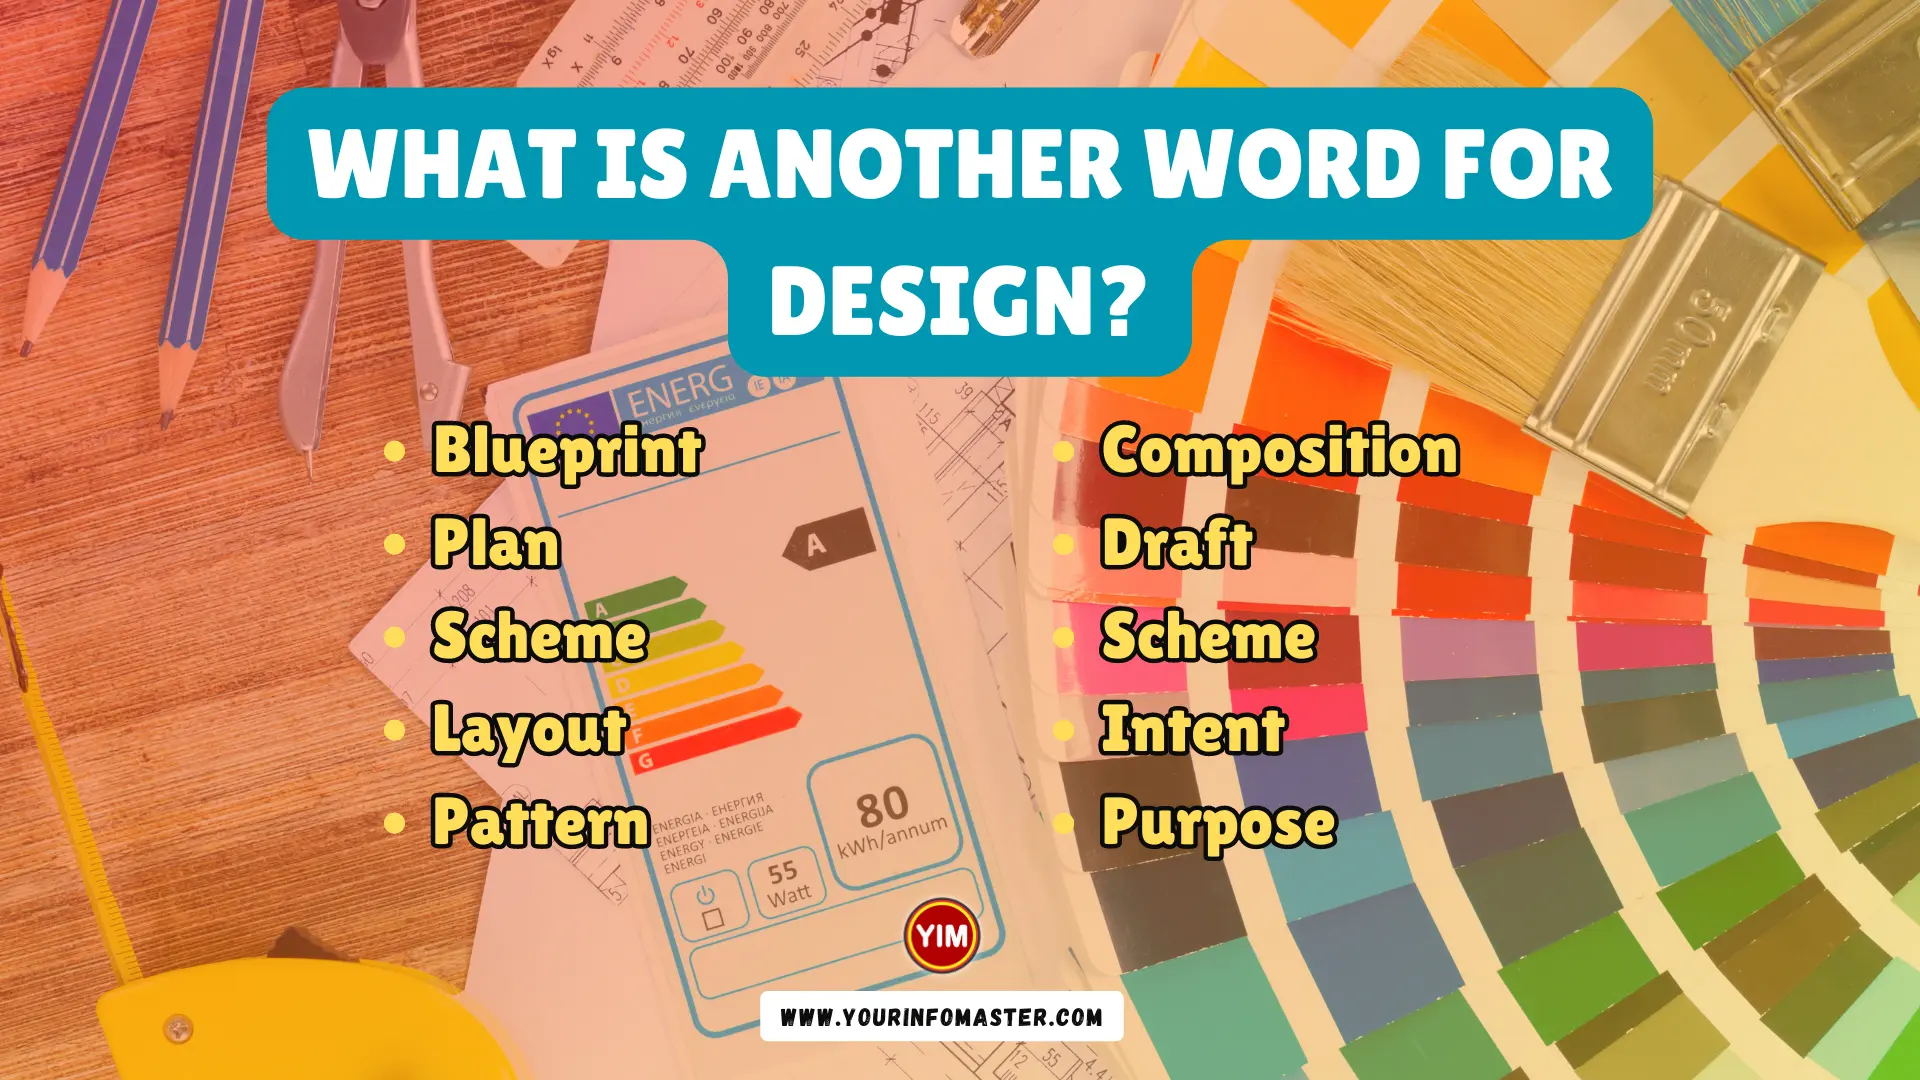 What is another word for Design